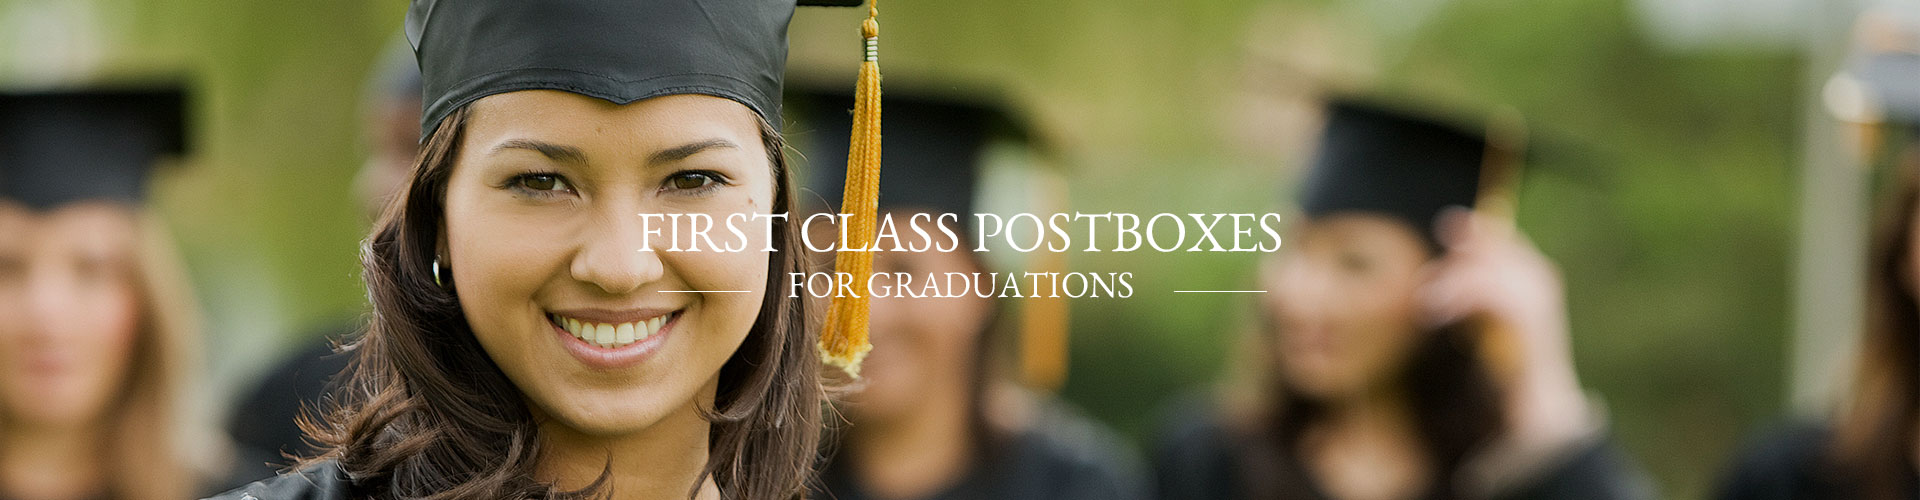 First Class Postboxes for Graduations